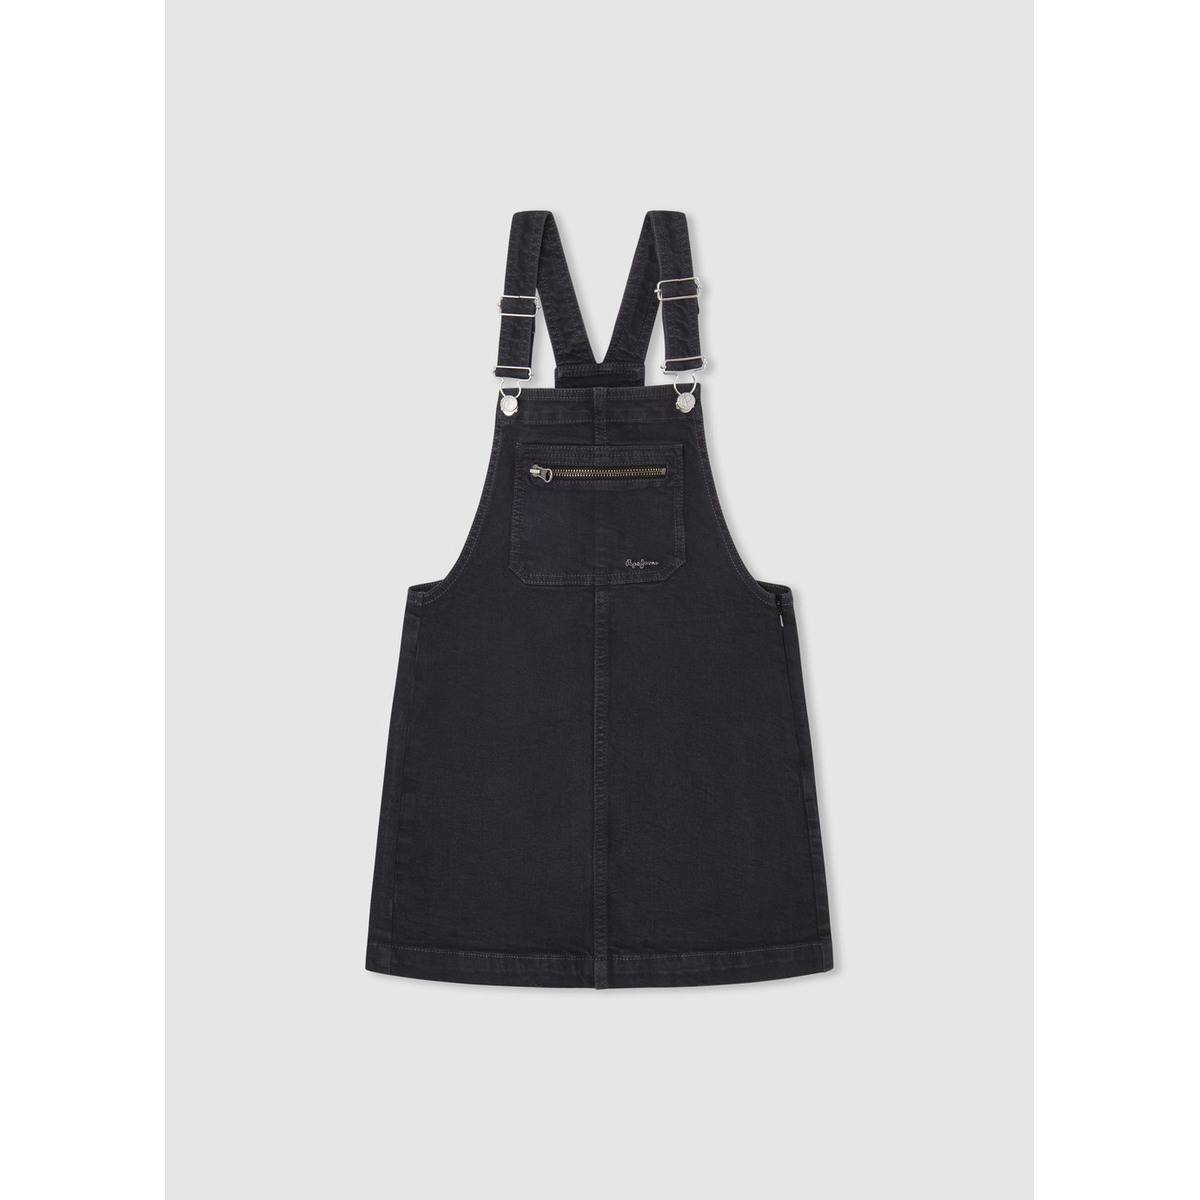 salopette fille pepe jeans pinafore